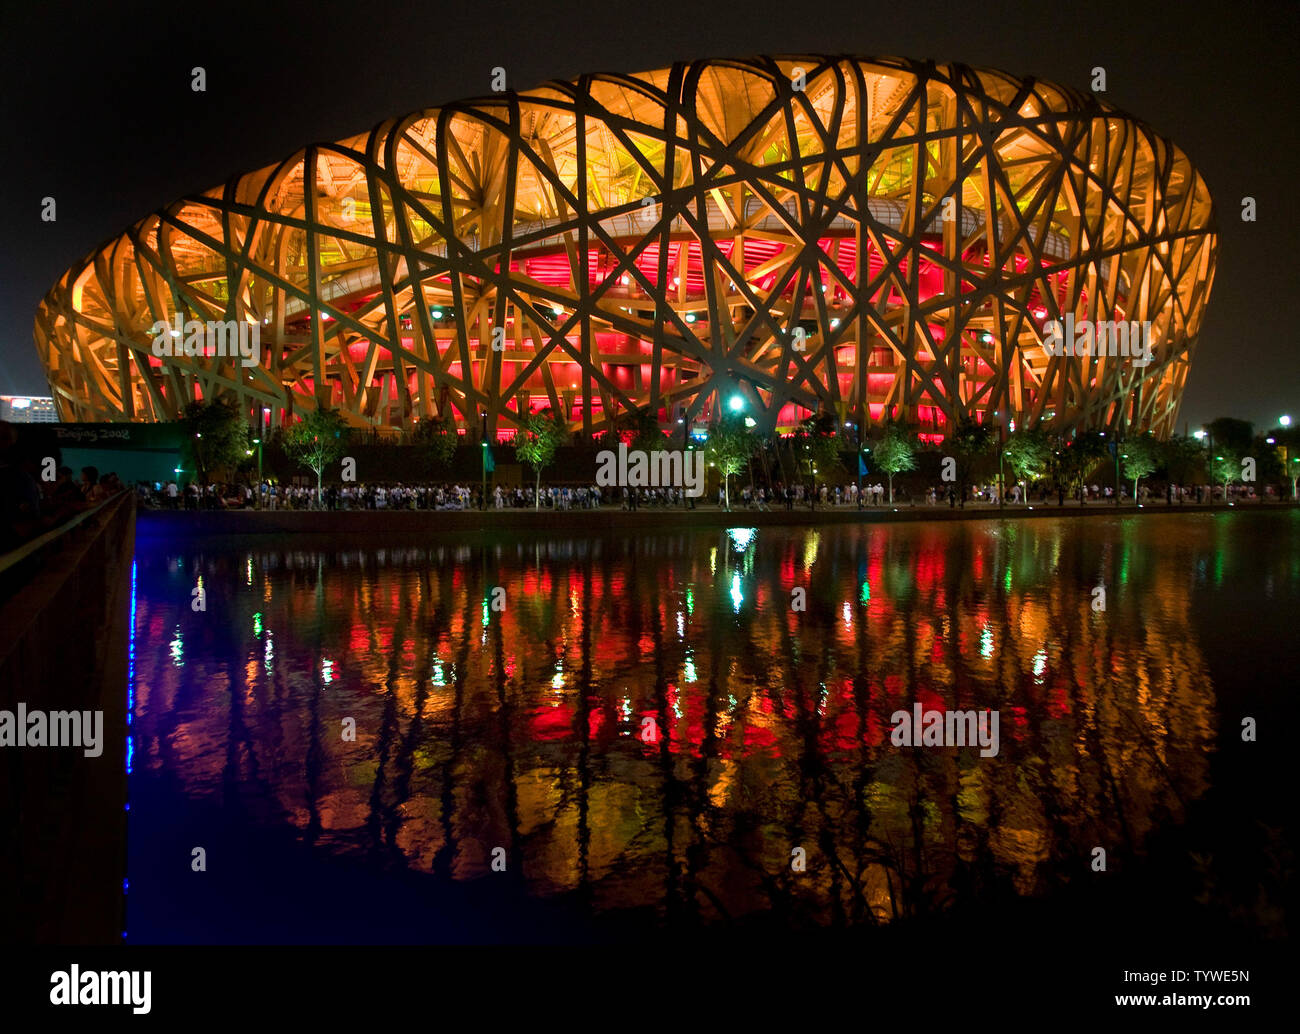 General view of the National Stadium, or Bird's Nest, during the closing ceremony for the 2008 Beijing Olympic Games August 24, 2008.  International Olympic Committee (IOC) chief Jacques Rogge declared the Beijing Olympics officially closed, bringing down the curtain on a glittering 16-day long sports extravaganza.  (UPI Photo/Stephen Shaver) Stock Photo